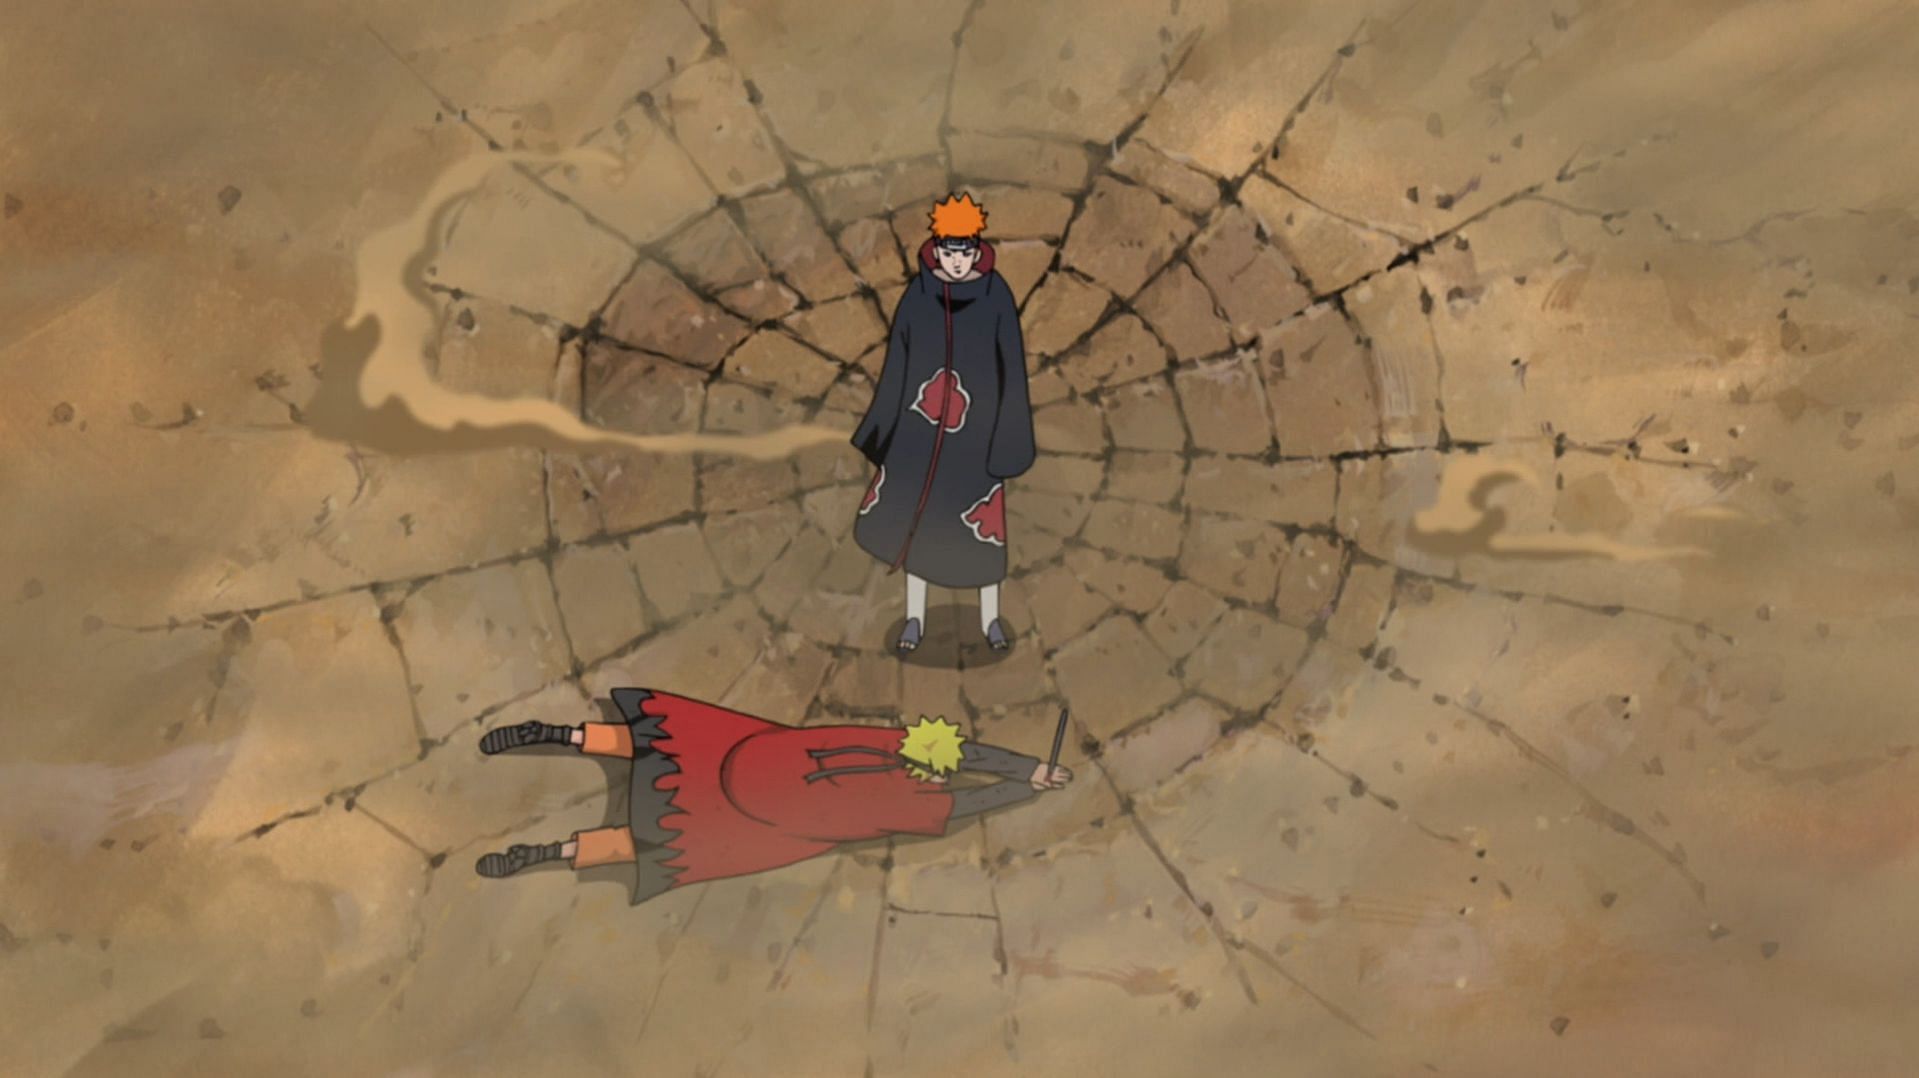 Where are the episodes when Naruto fights Pain? - Quora